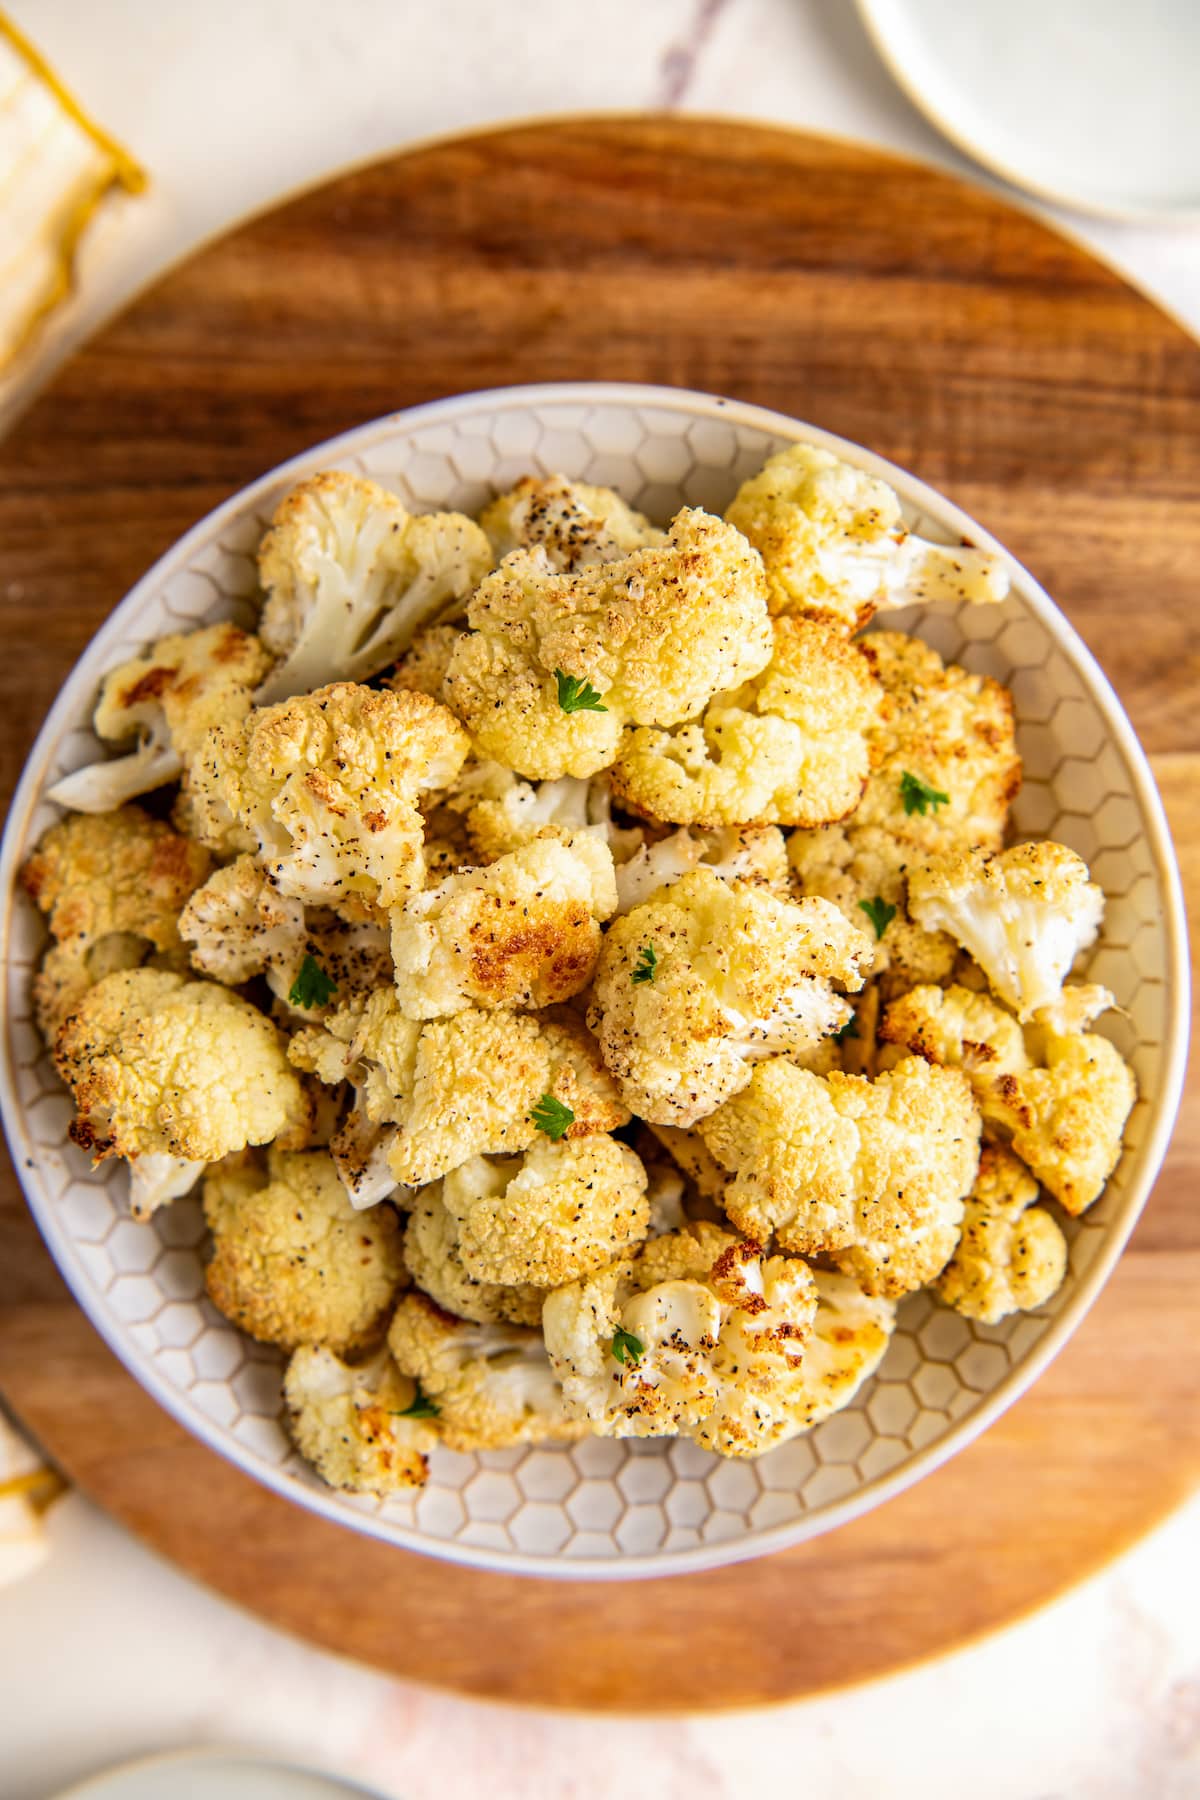 Overhead view of a plate of roasted cauliflower